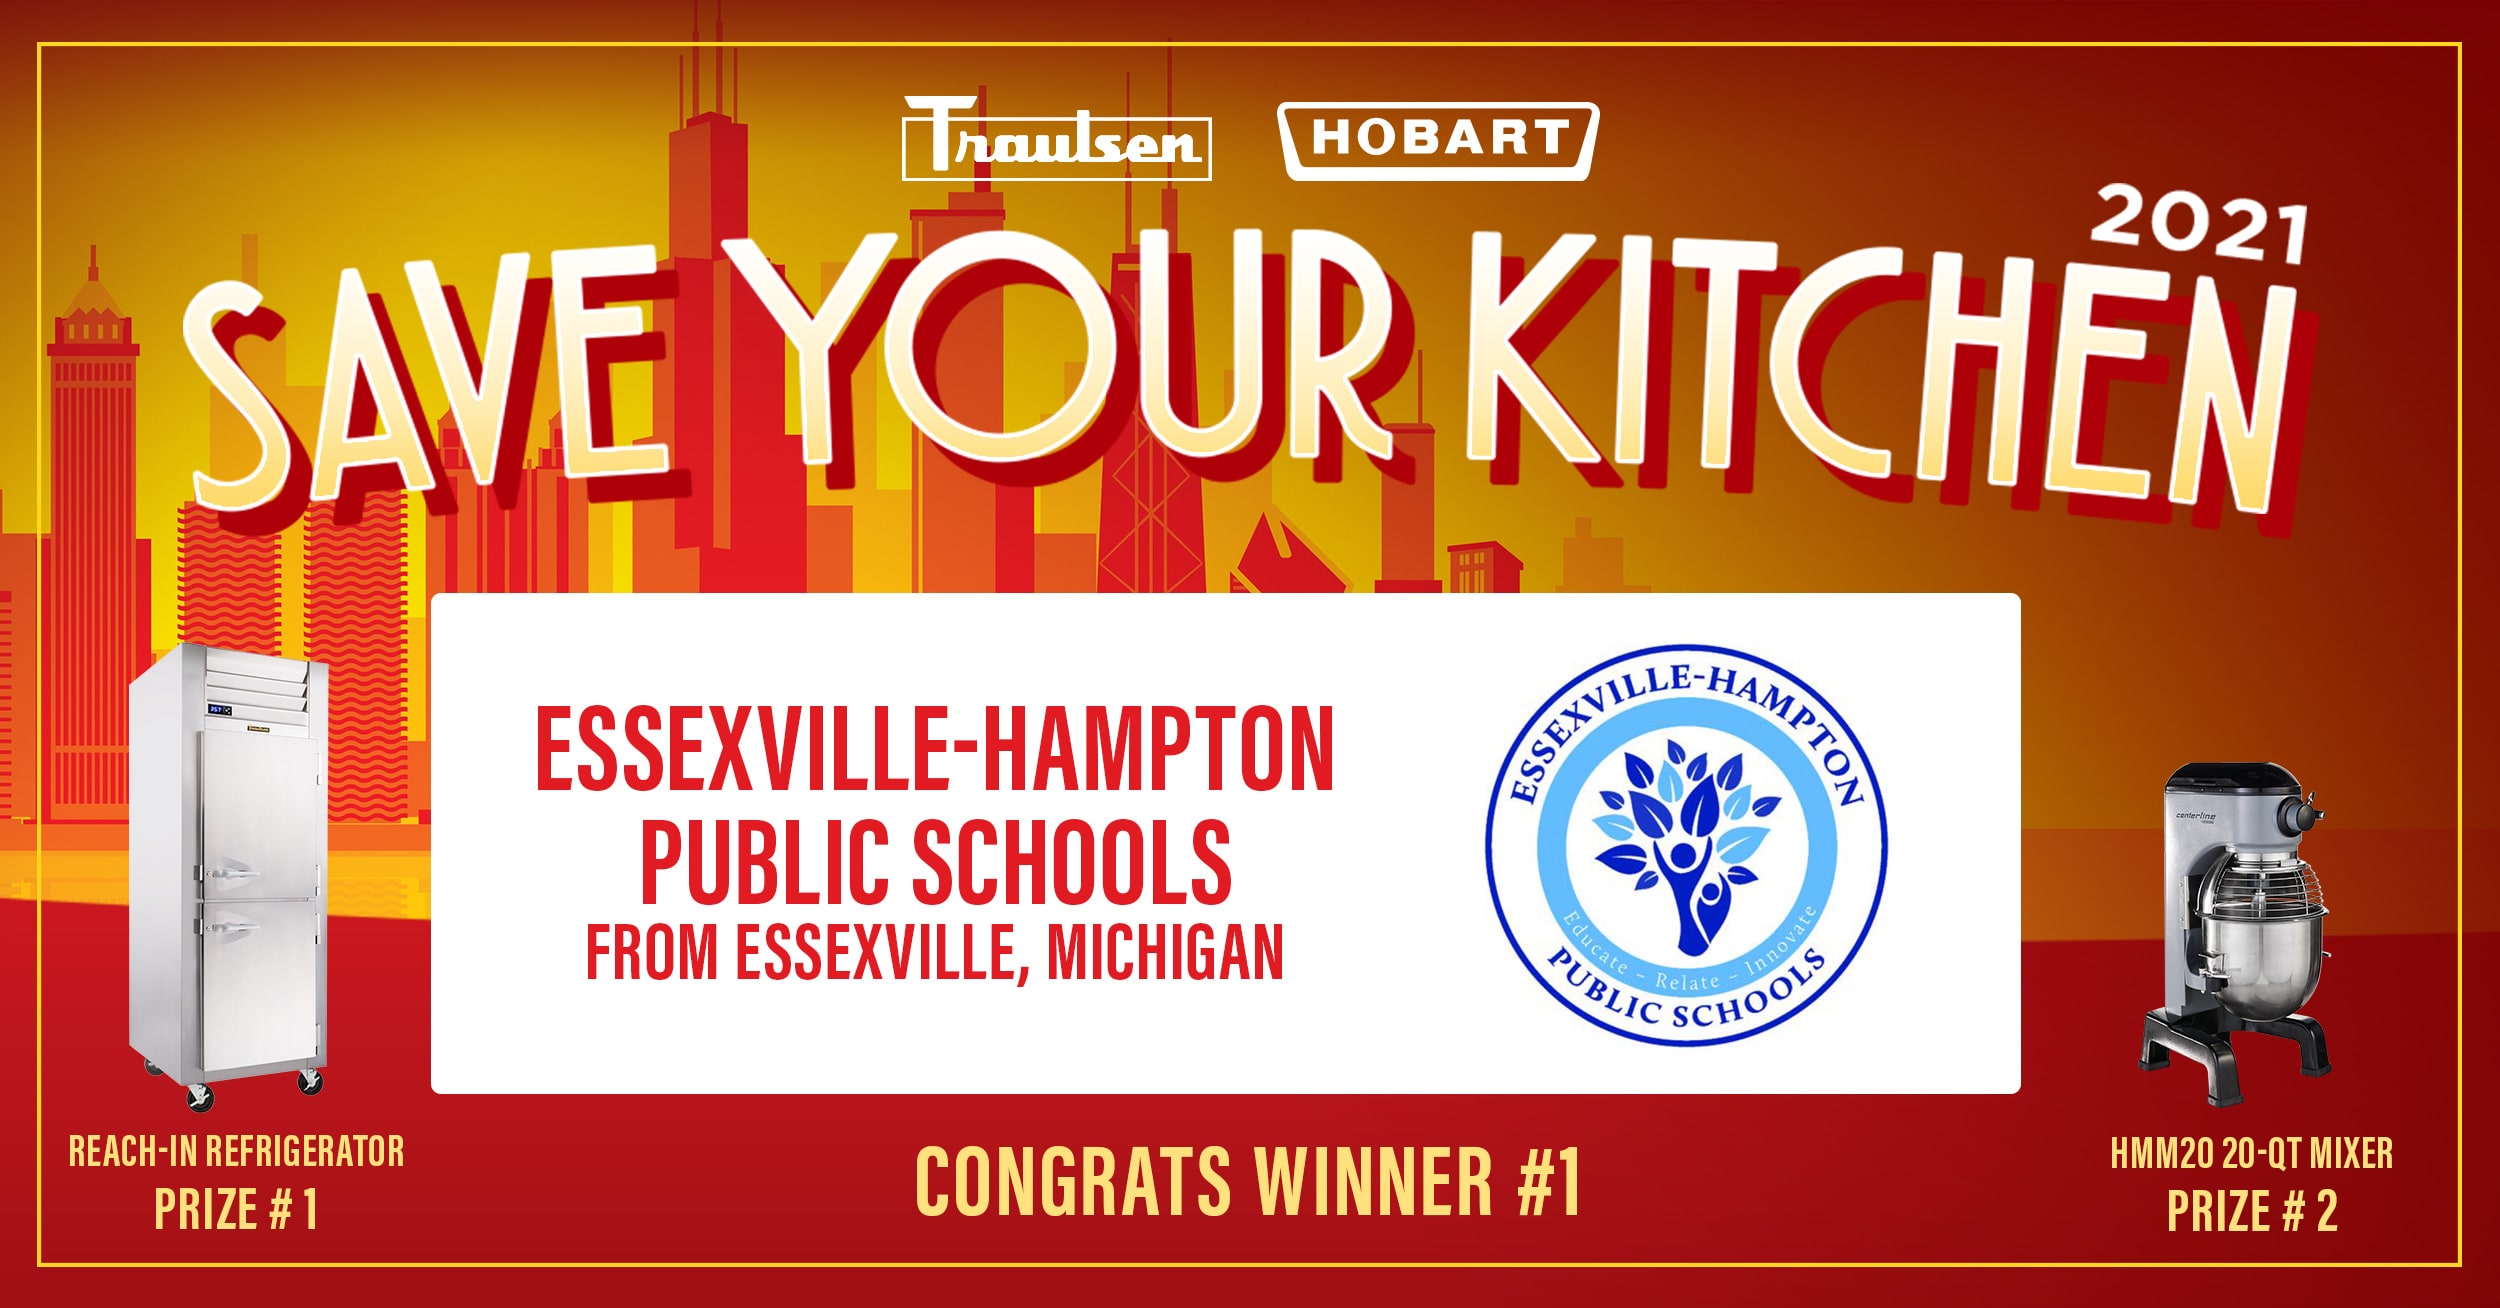 Traulsen and Hobart Announce First Winner of  Save Your Kitchen 2021